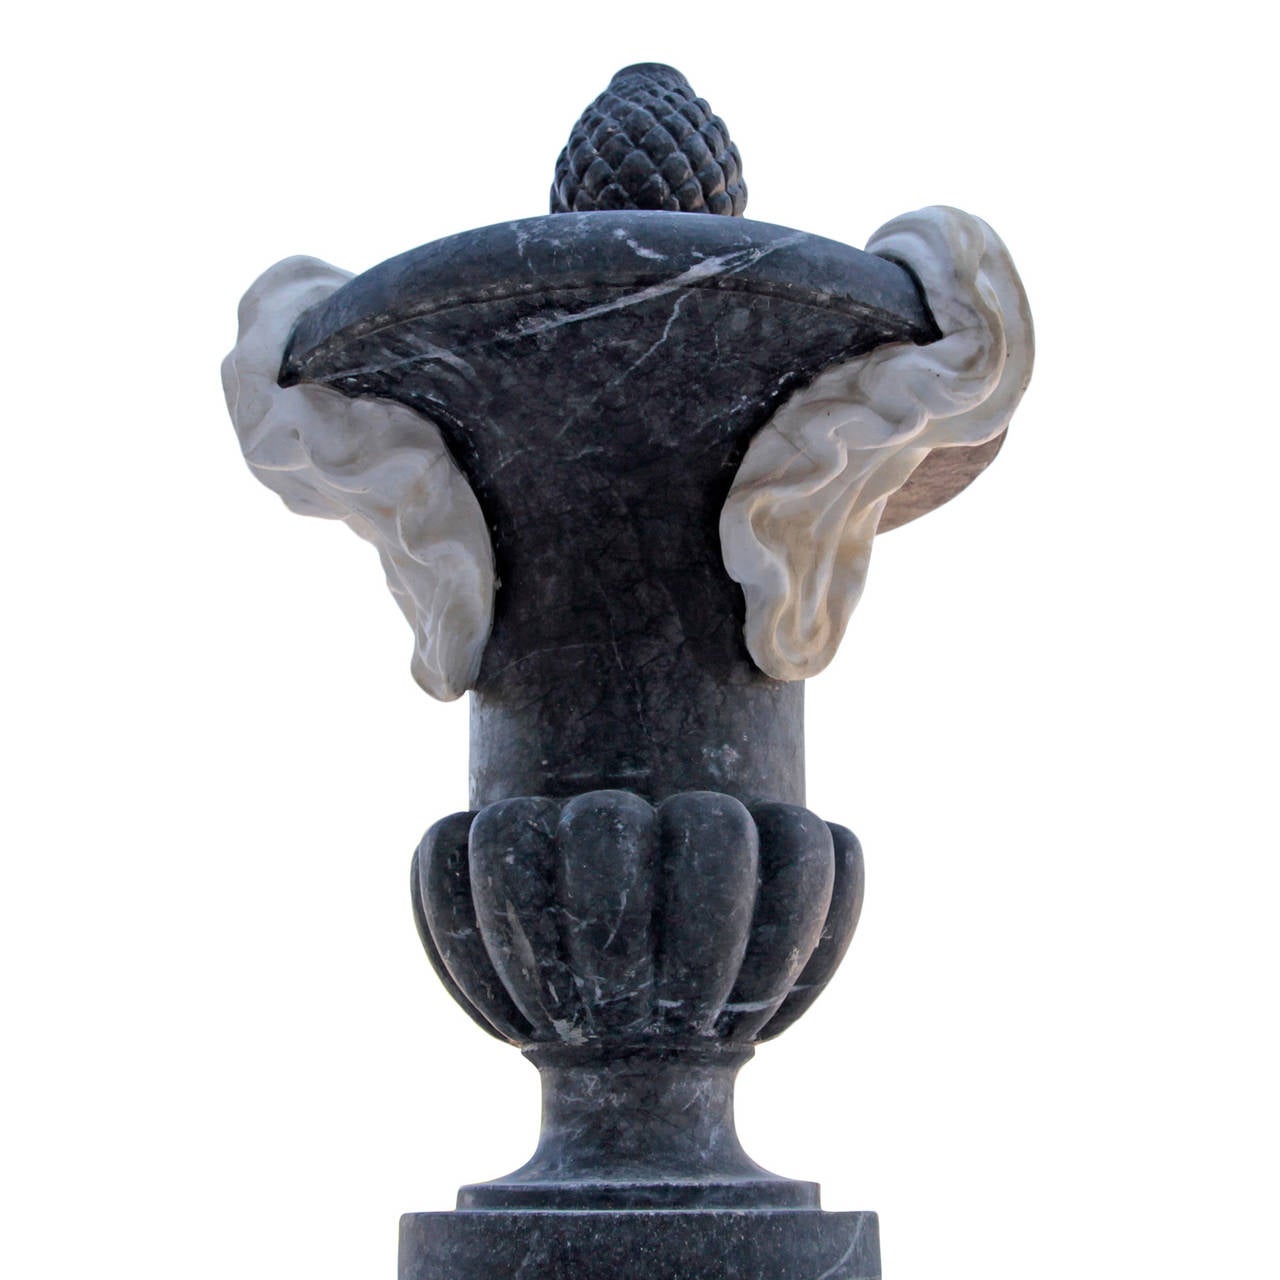 Magnificent Italian Marble Fountain from the 20th Century.
It is carved out of white and black marble and probably from Italy, early 20th century. The fountain stands on a high, trefoil cut base and has a narrow shaft surrounded by three dolphins.